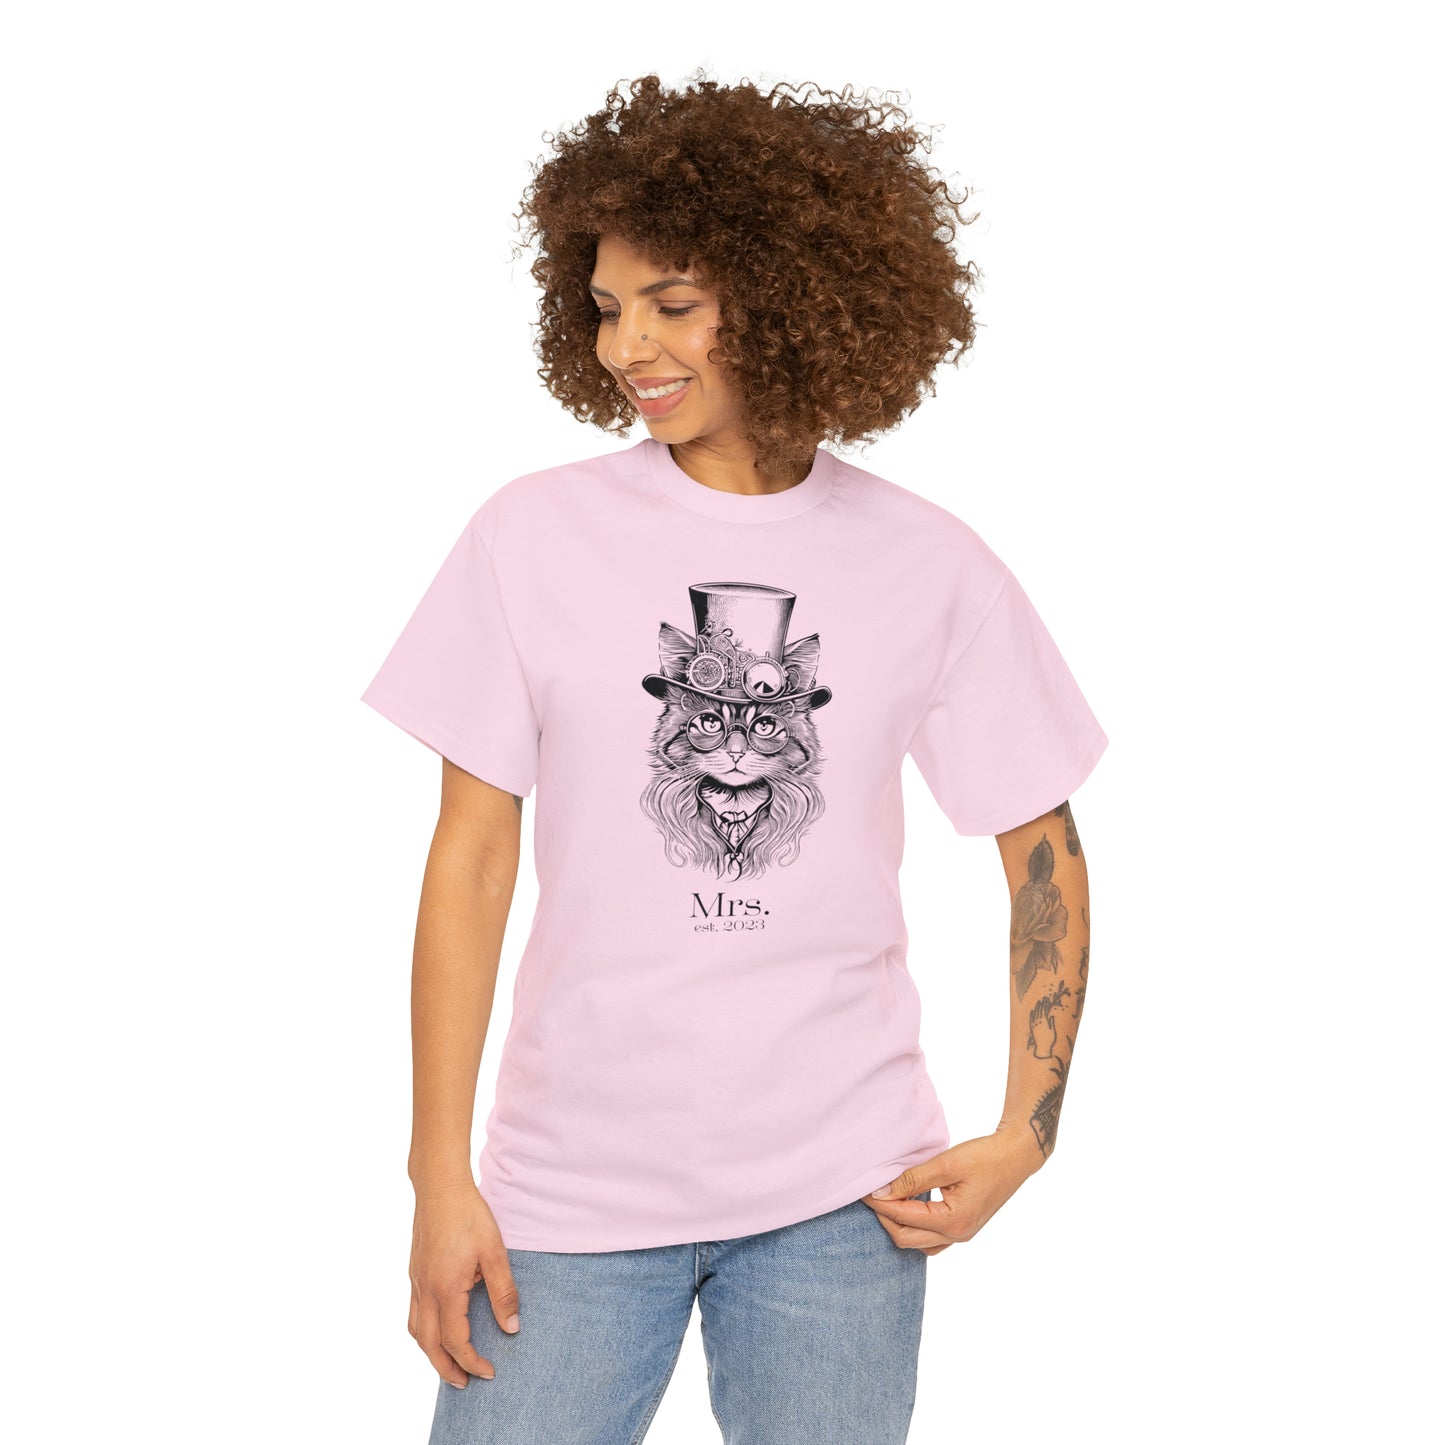 Steampunk Lady Cat T-Shirt For Wedding T Shirt For Wife Shirt For Couples Shirts For Bride Tee For Woman